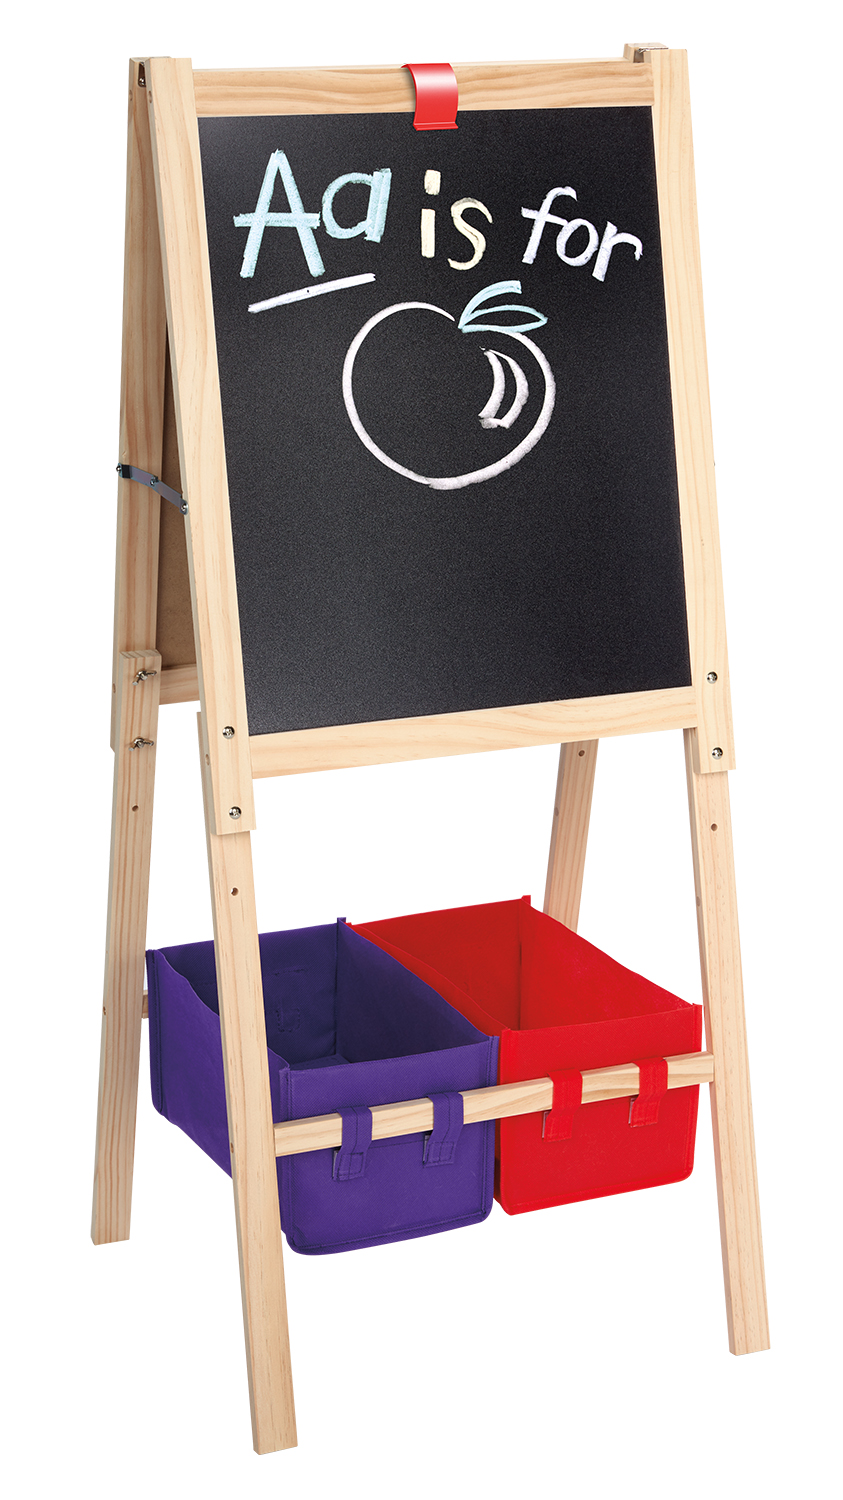 Cra-Z-Art 37"- 43" Double-Sided Wood Children's Art Easel, Child Ages 4 and up - image 4 of 9